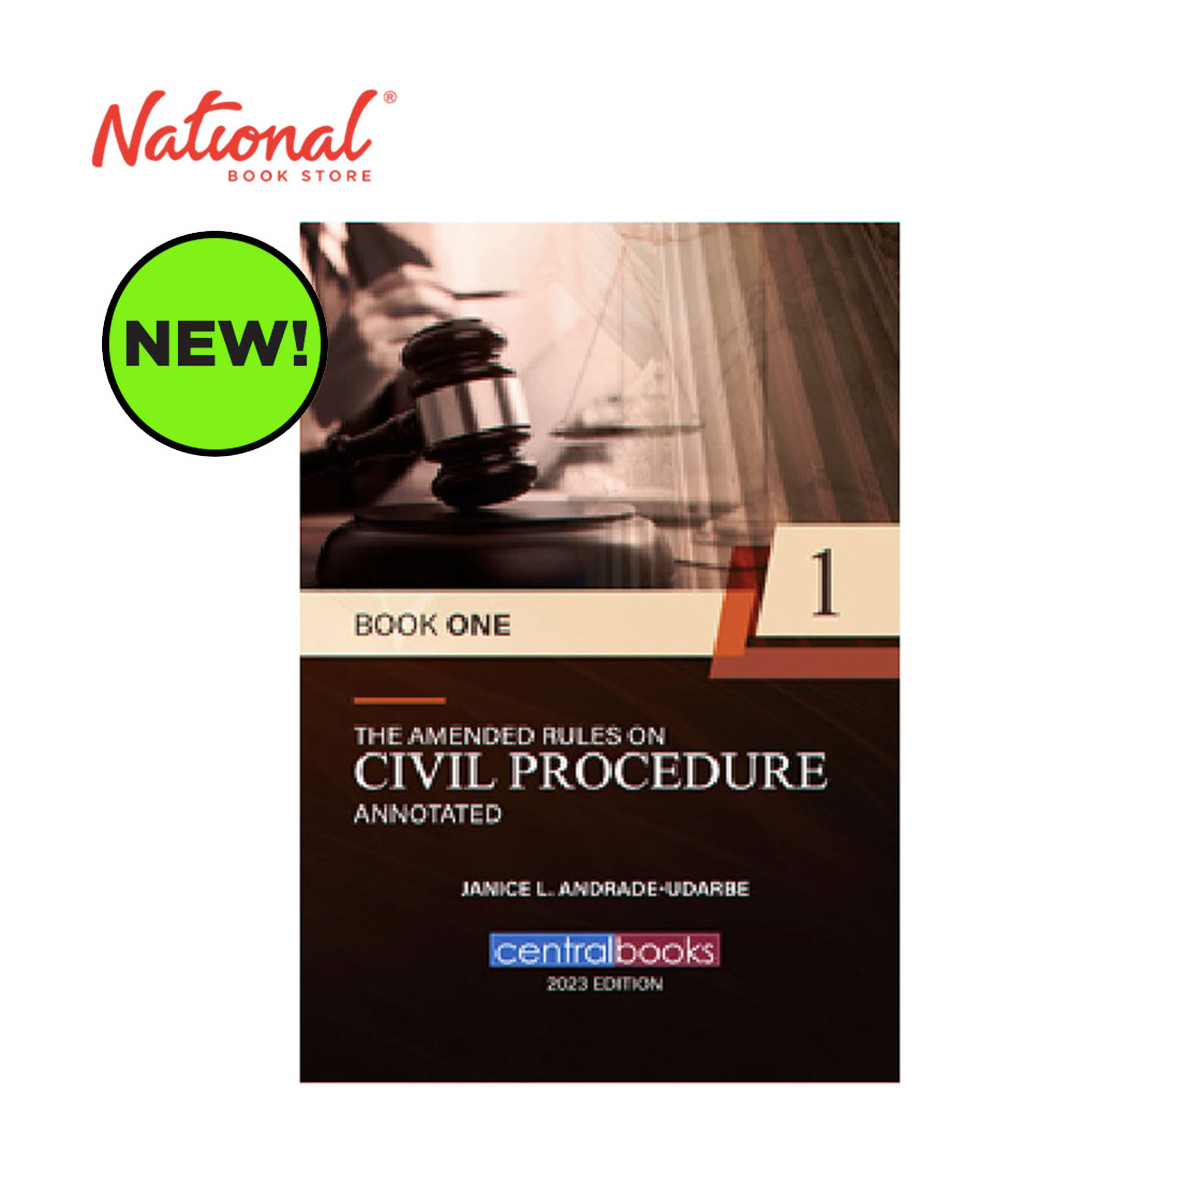 *PRE-ORDER* The Amended Rules on Civil Procedure Annotated Book 1 by Judge Janice L. Andrade-Udarbe - Hardcover - Law Book